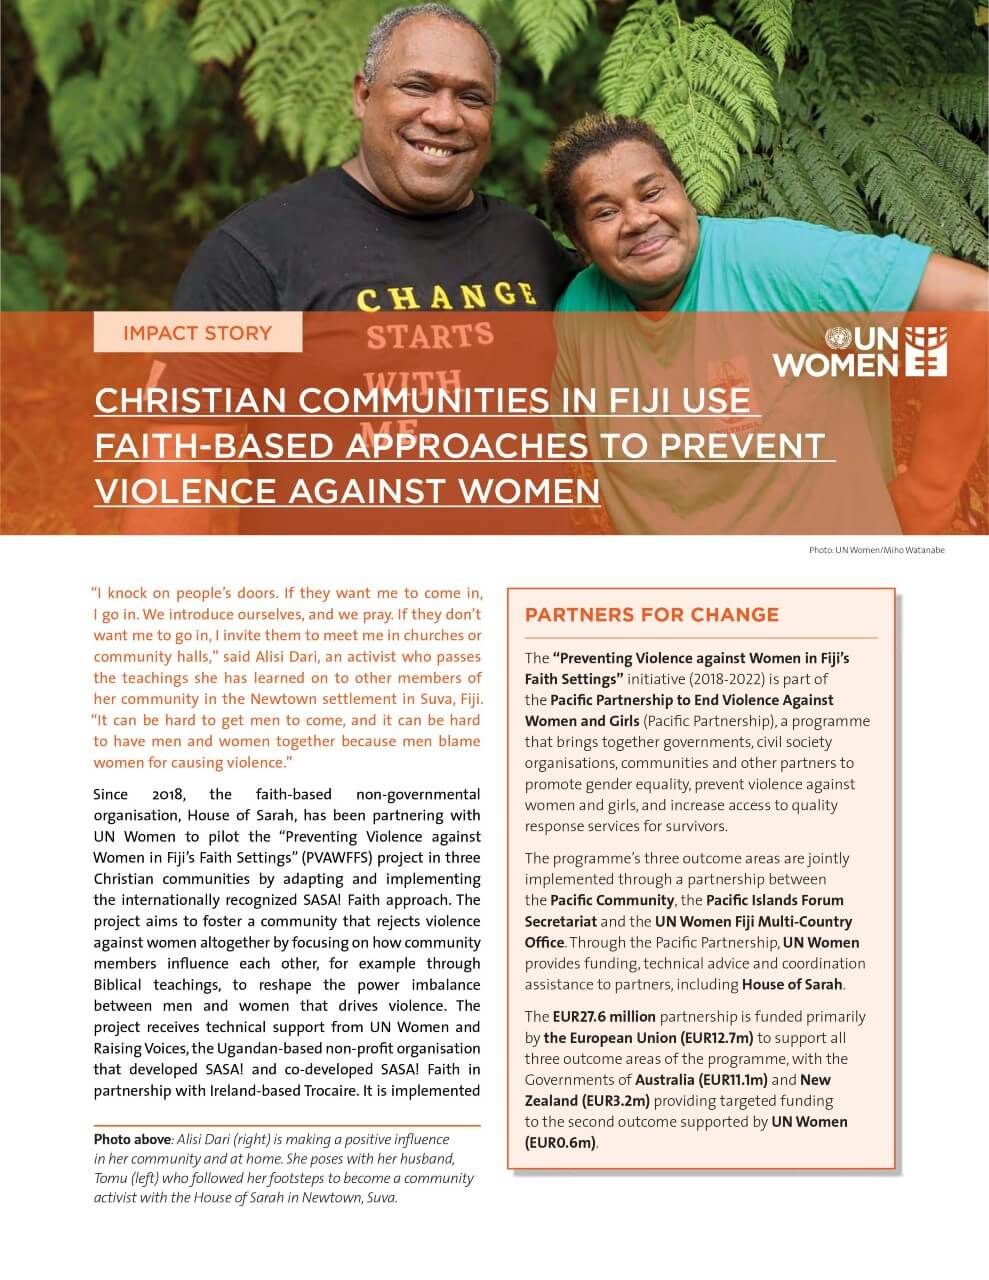 Christian communities in Fiji use faith-based approaches to prevent violence against women